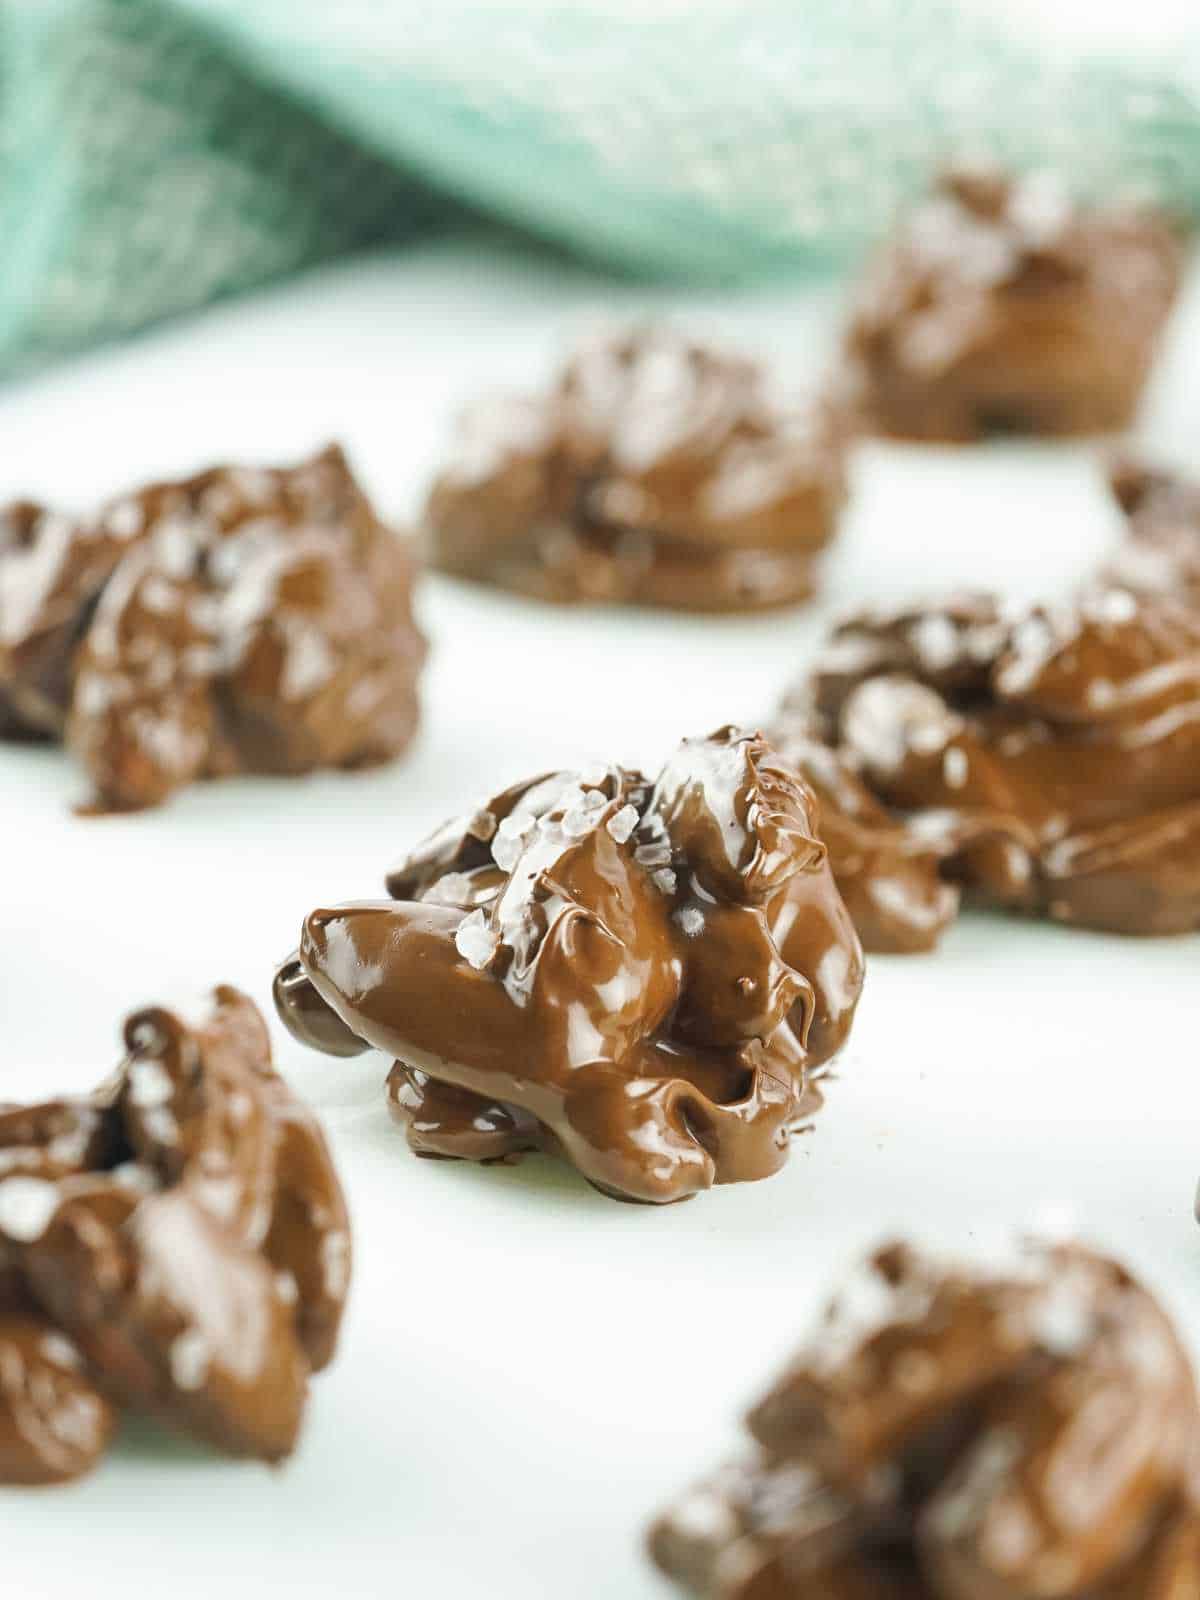 rows of chocolate candies  firming up on parchment paper.